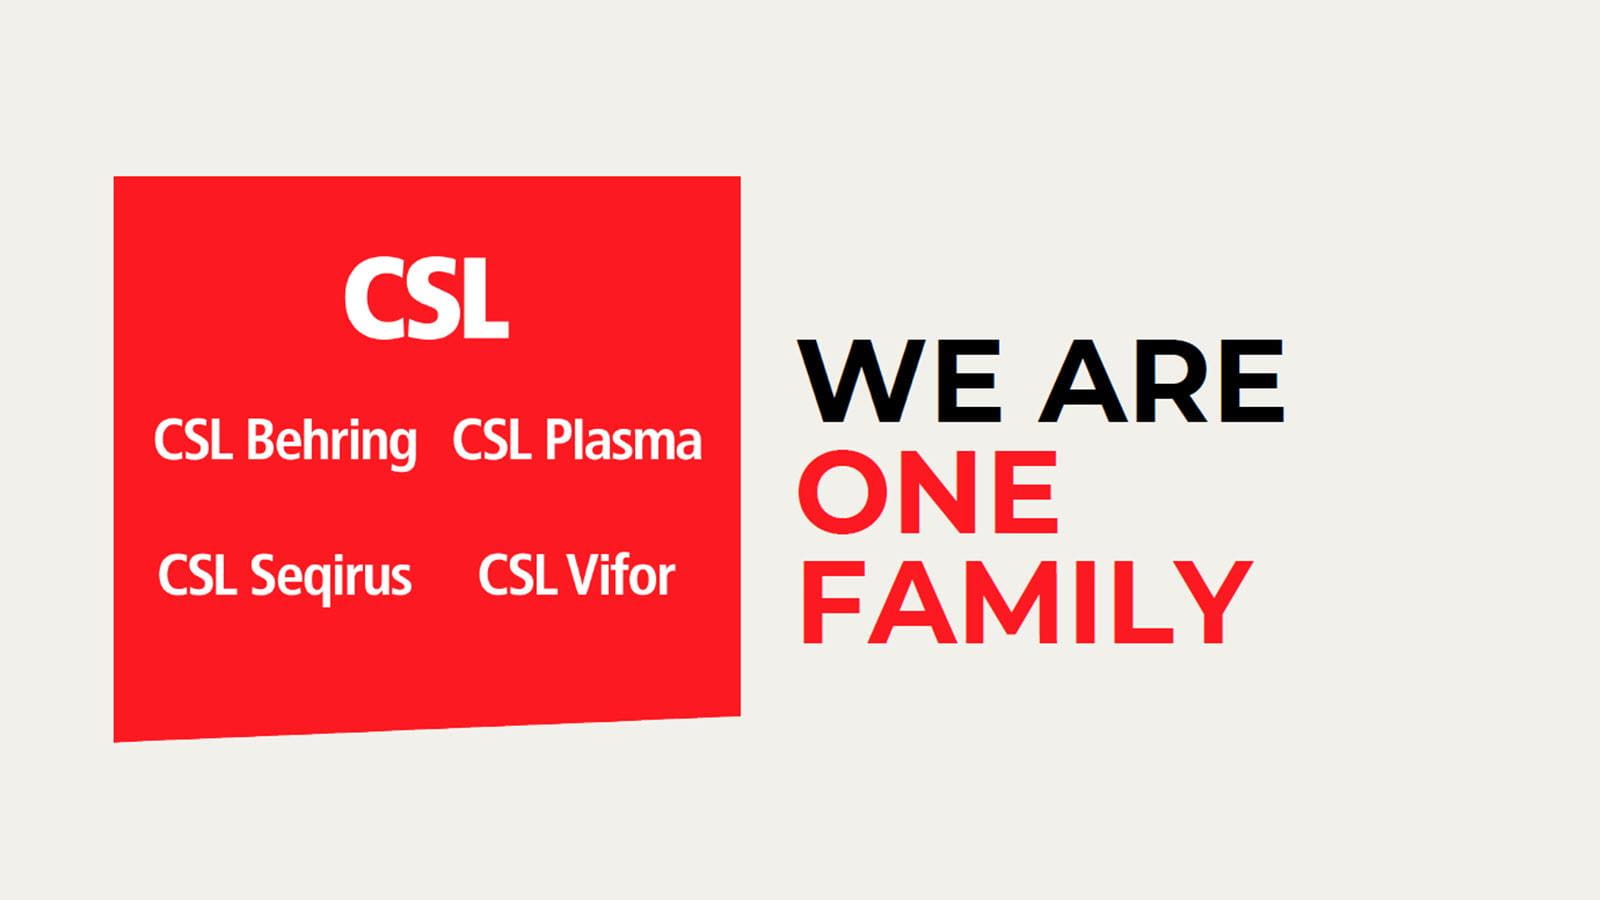 We Are One Family featuring CSL business units CSL Behring, CSL Plasma, CSL Seqirus and CSL Vifor